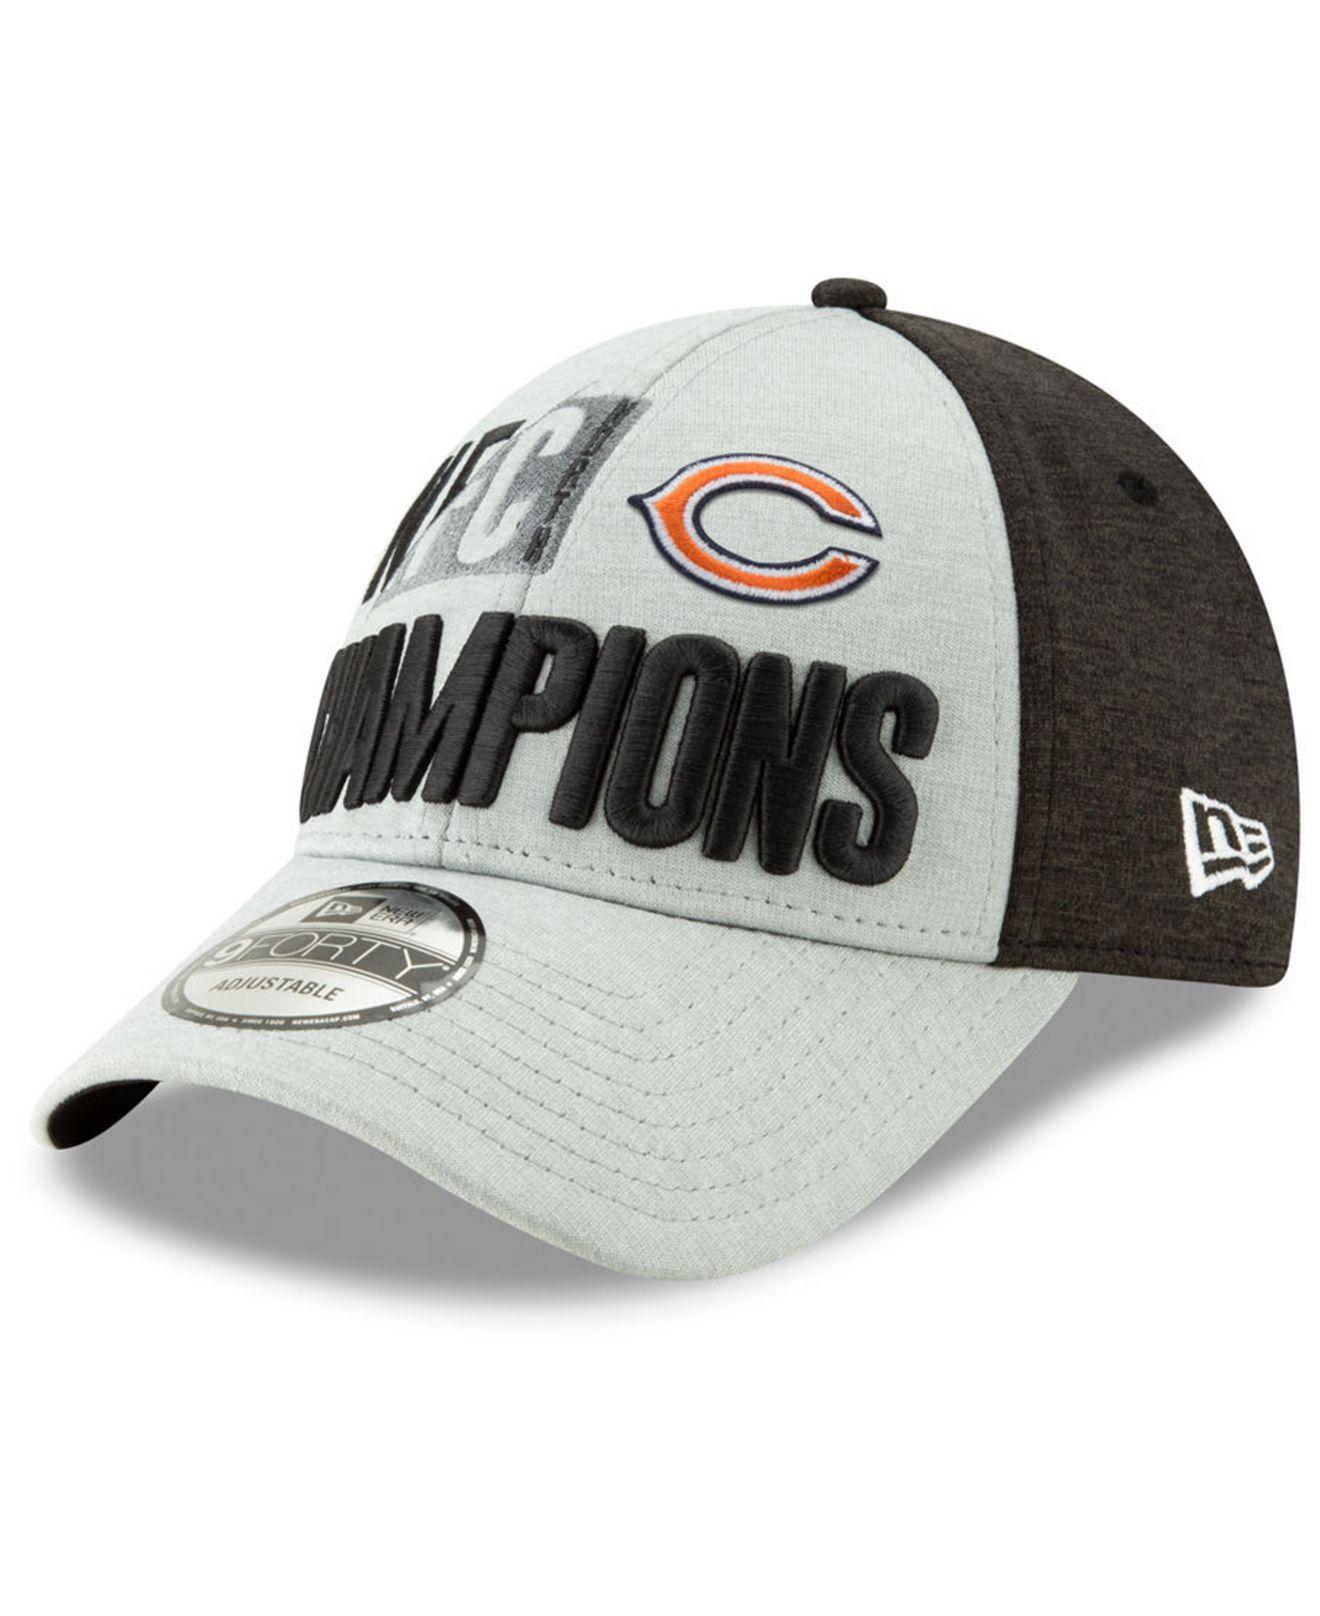 bears division champs hat